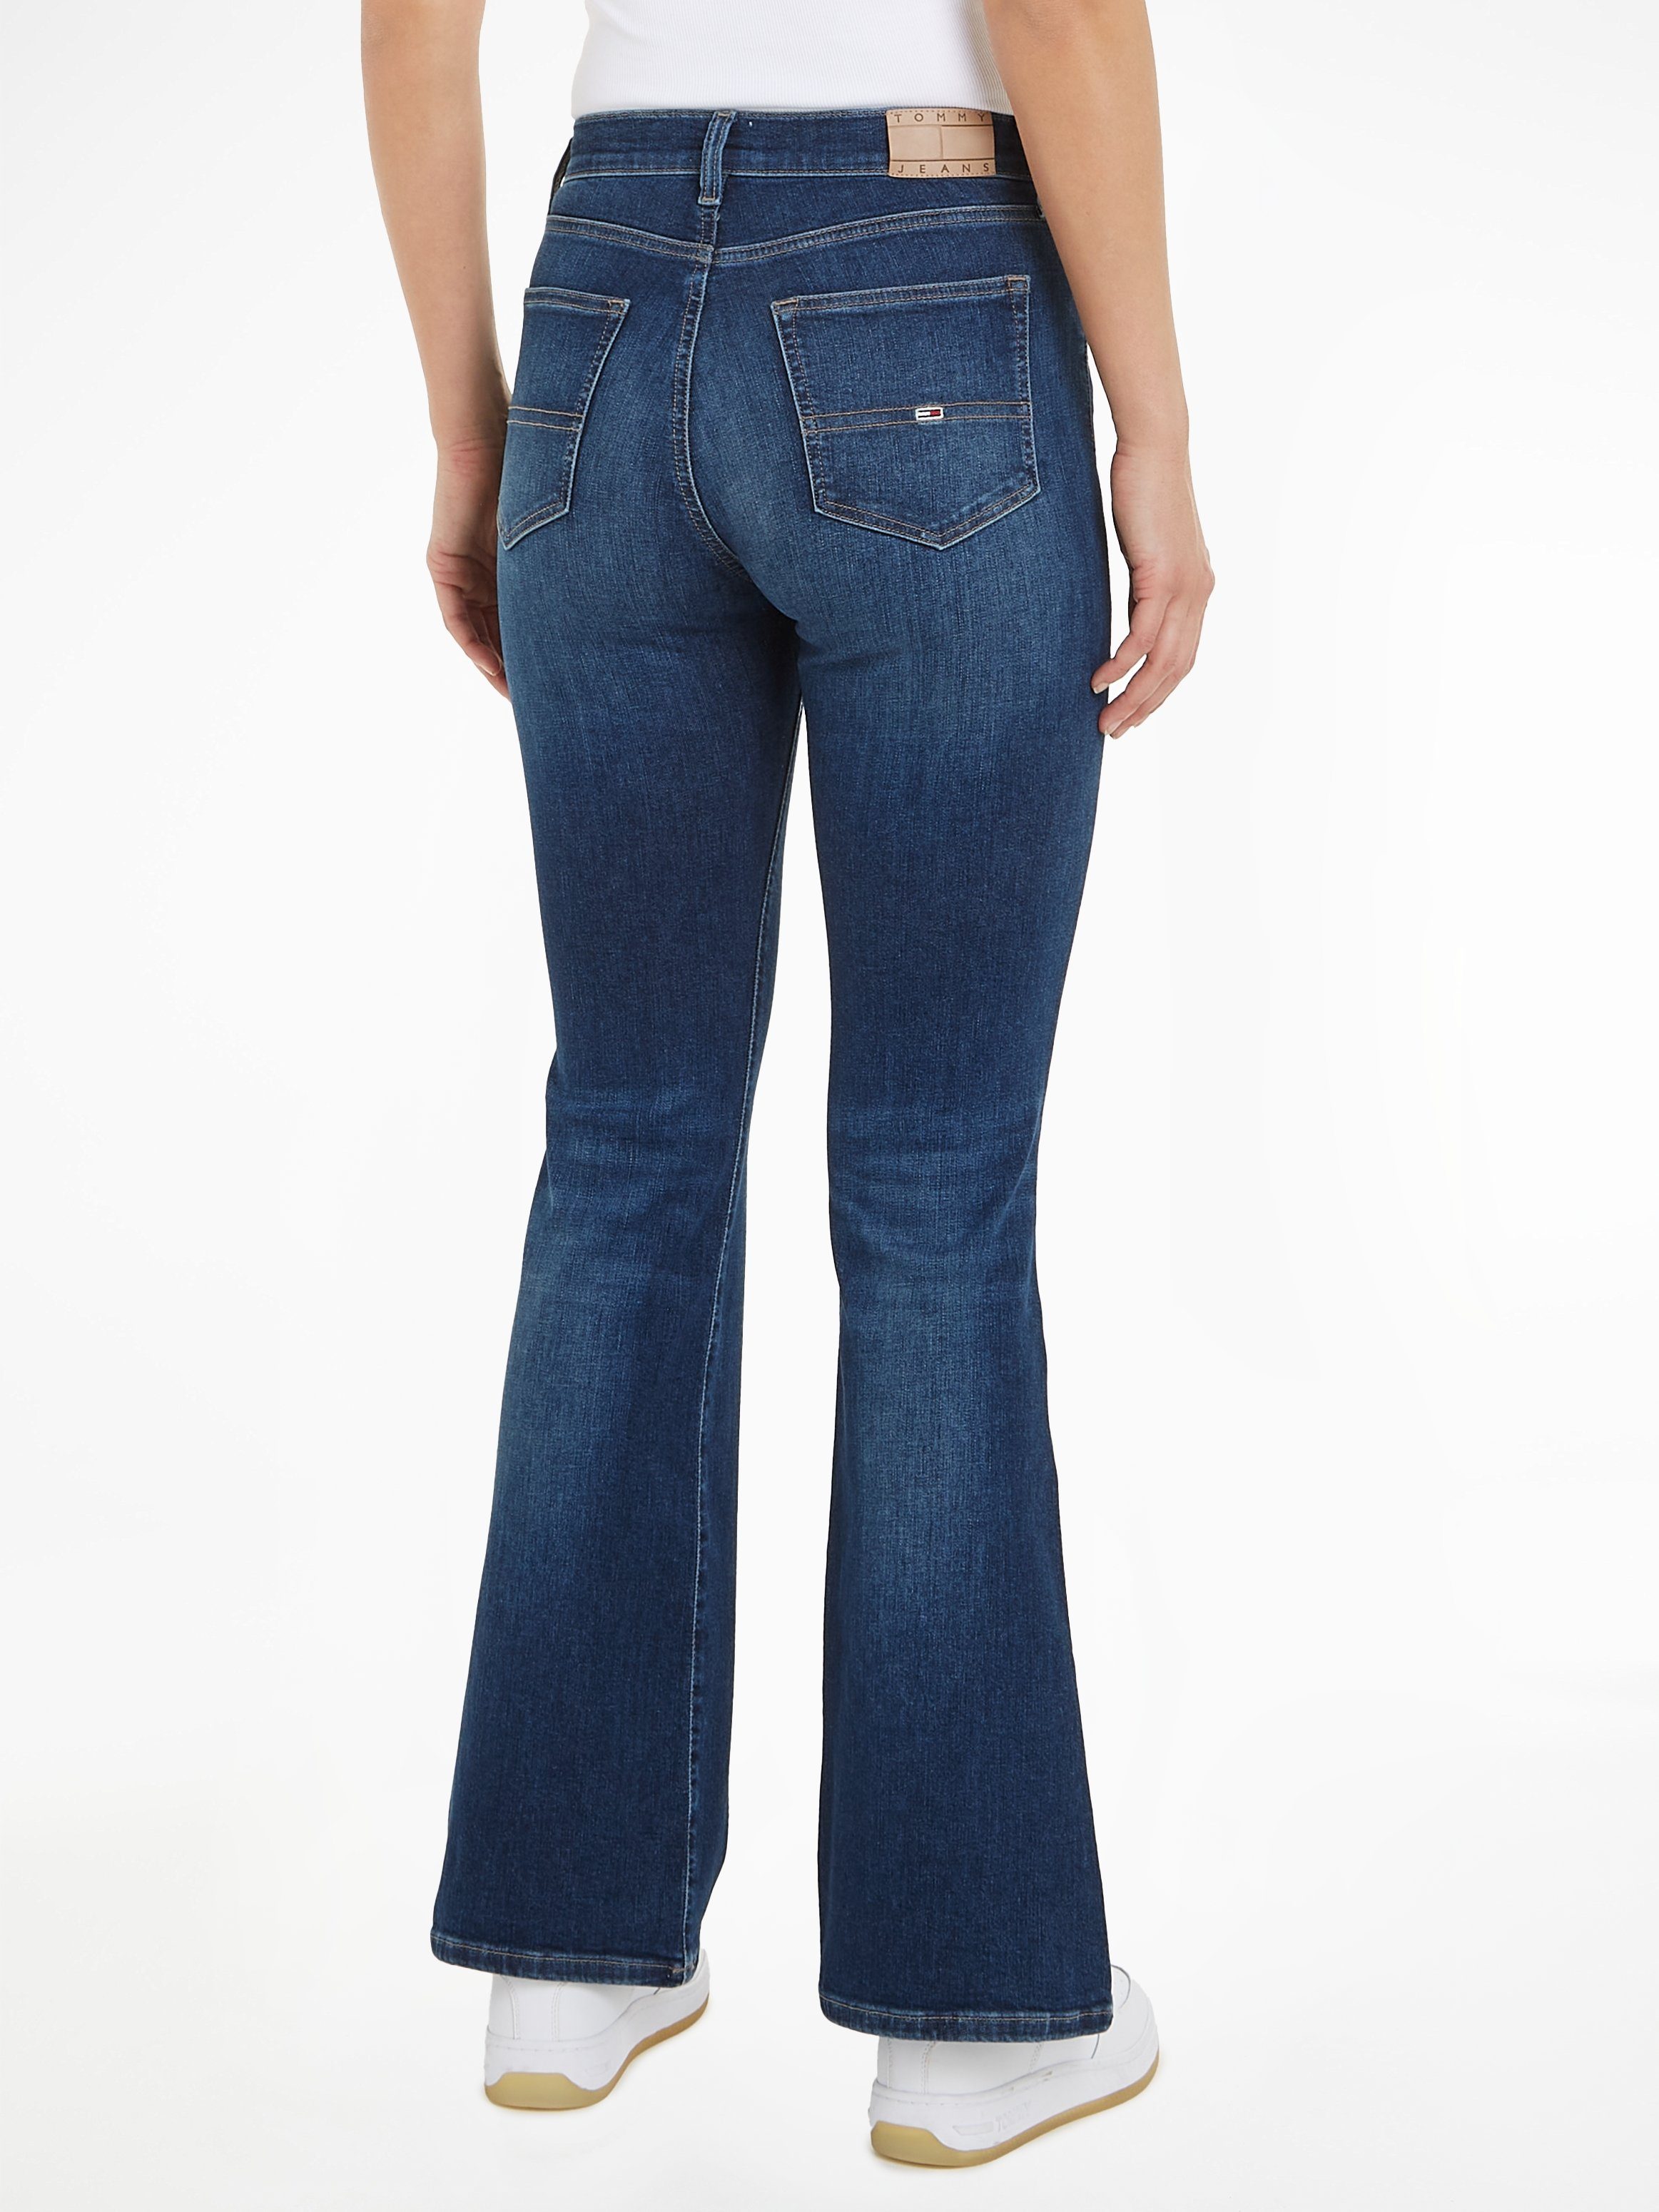 Jeans Sylvia Markenlabel Bequeme mit Jeans Tommy